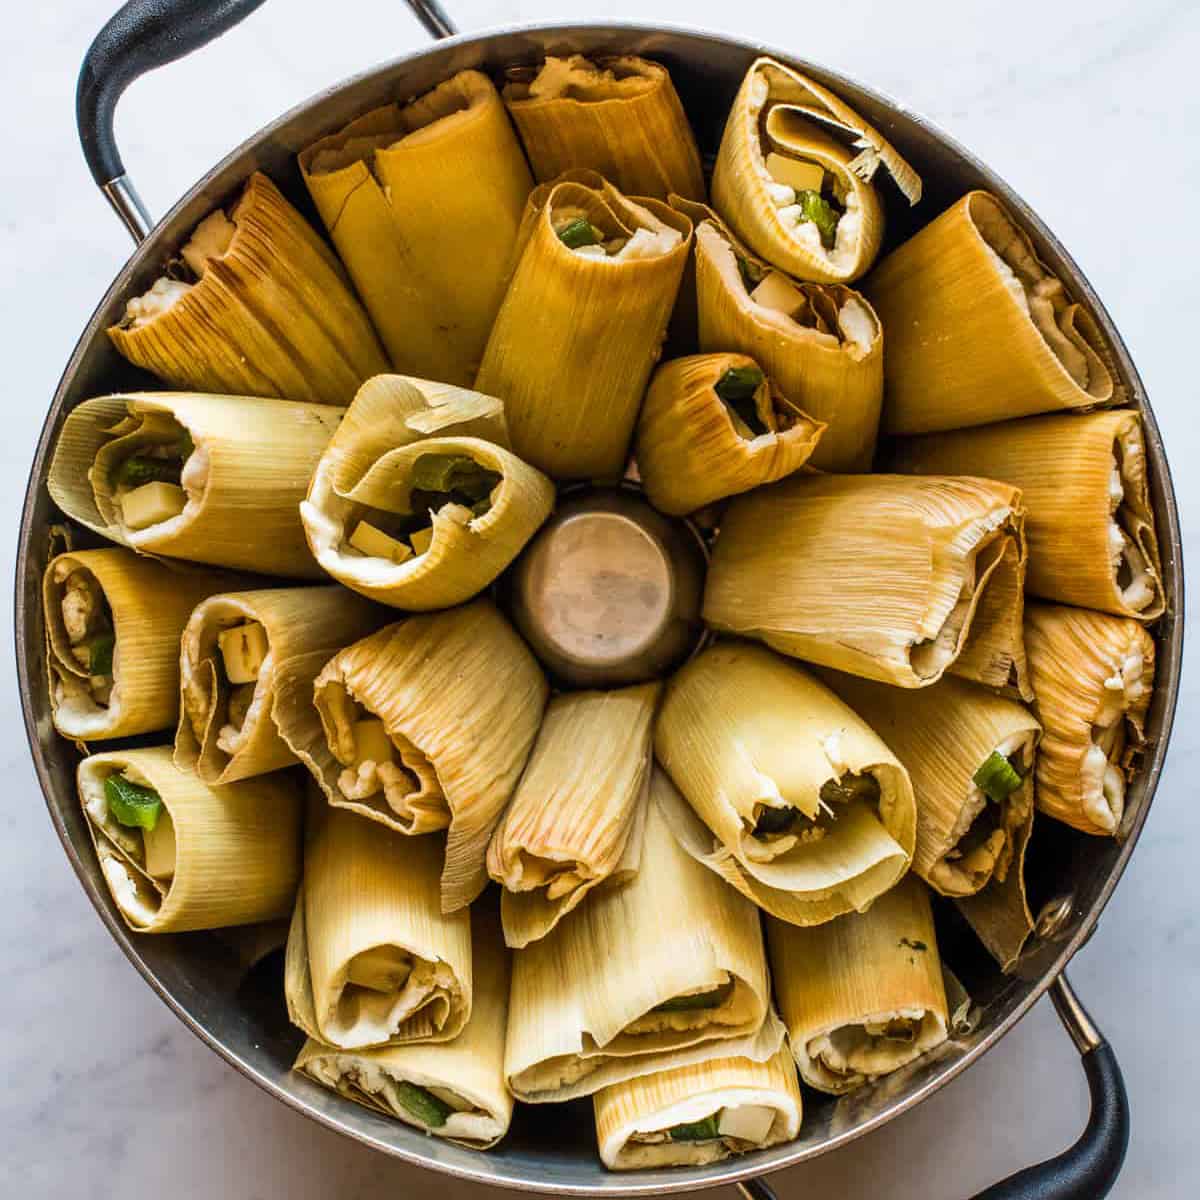 Tamales de Rajas in a steamer pot ready to be steamed.